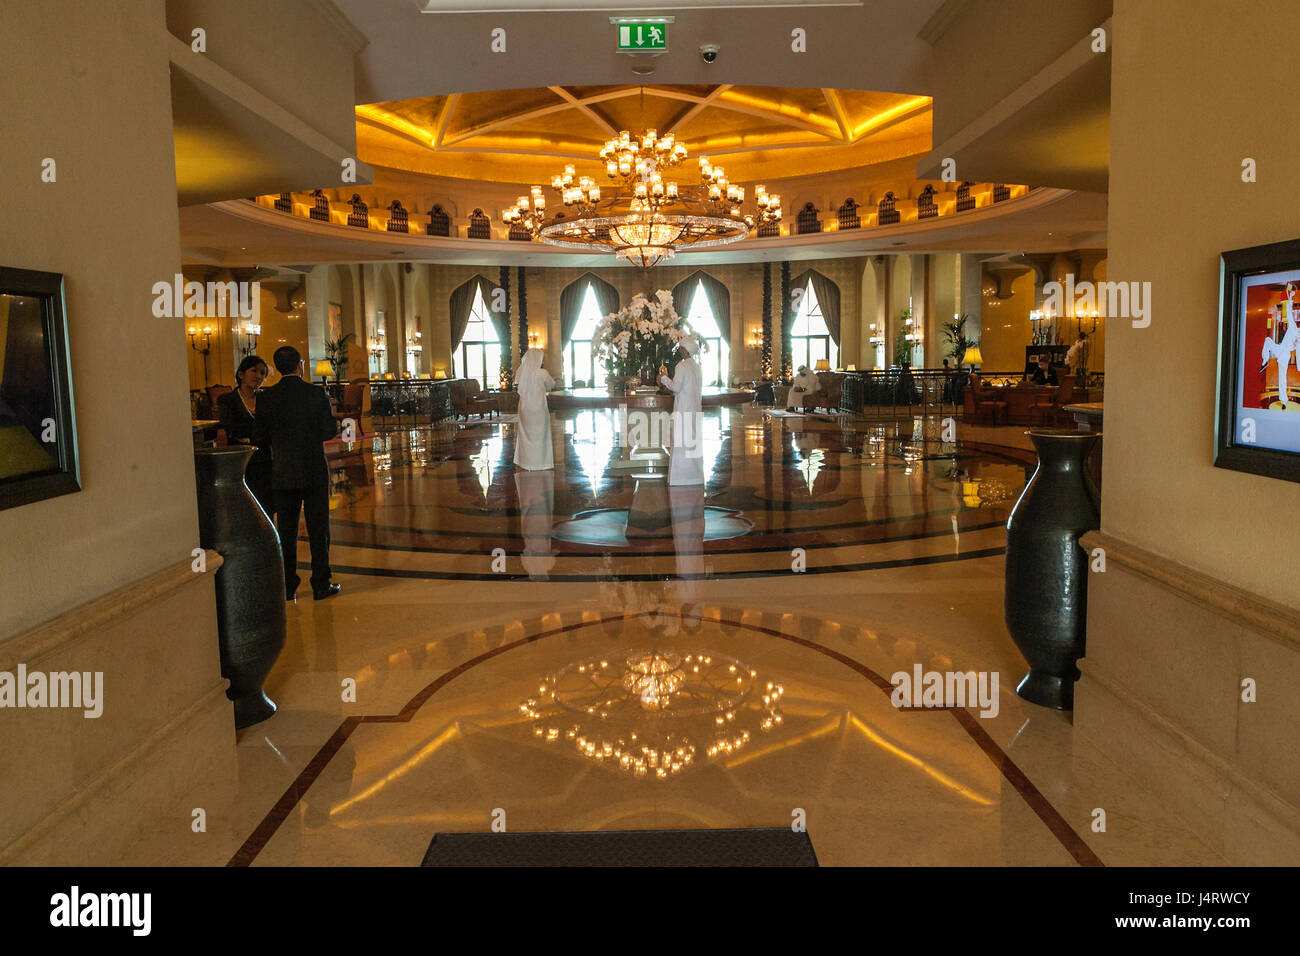 SHANGRI LA HOTEL,ABU DHABI, UAE-10TH SEPT 2015:-The hotel has excellent views of grand mosque named after sheikh Zayed. Stock Photo